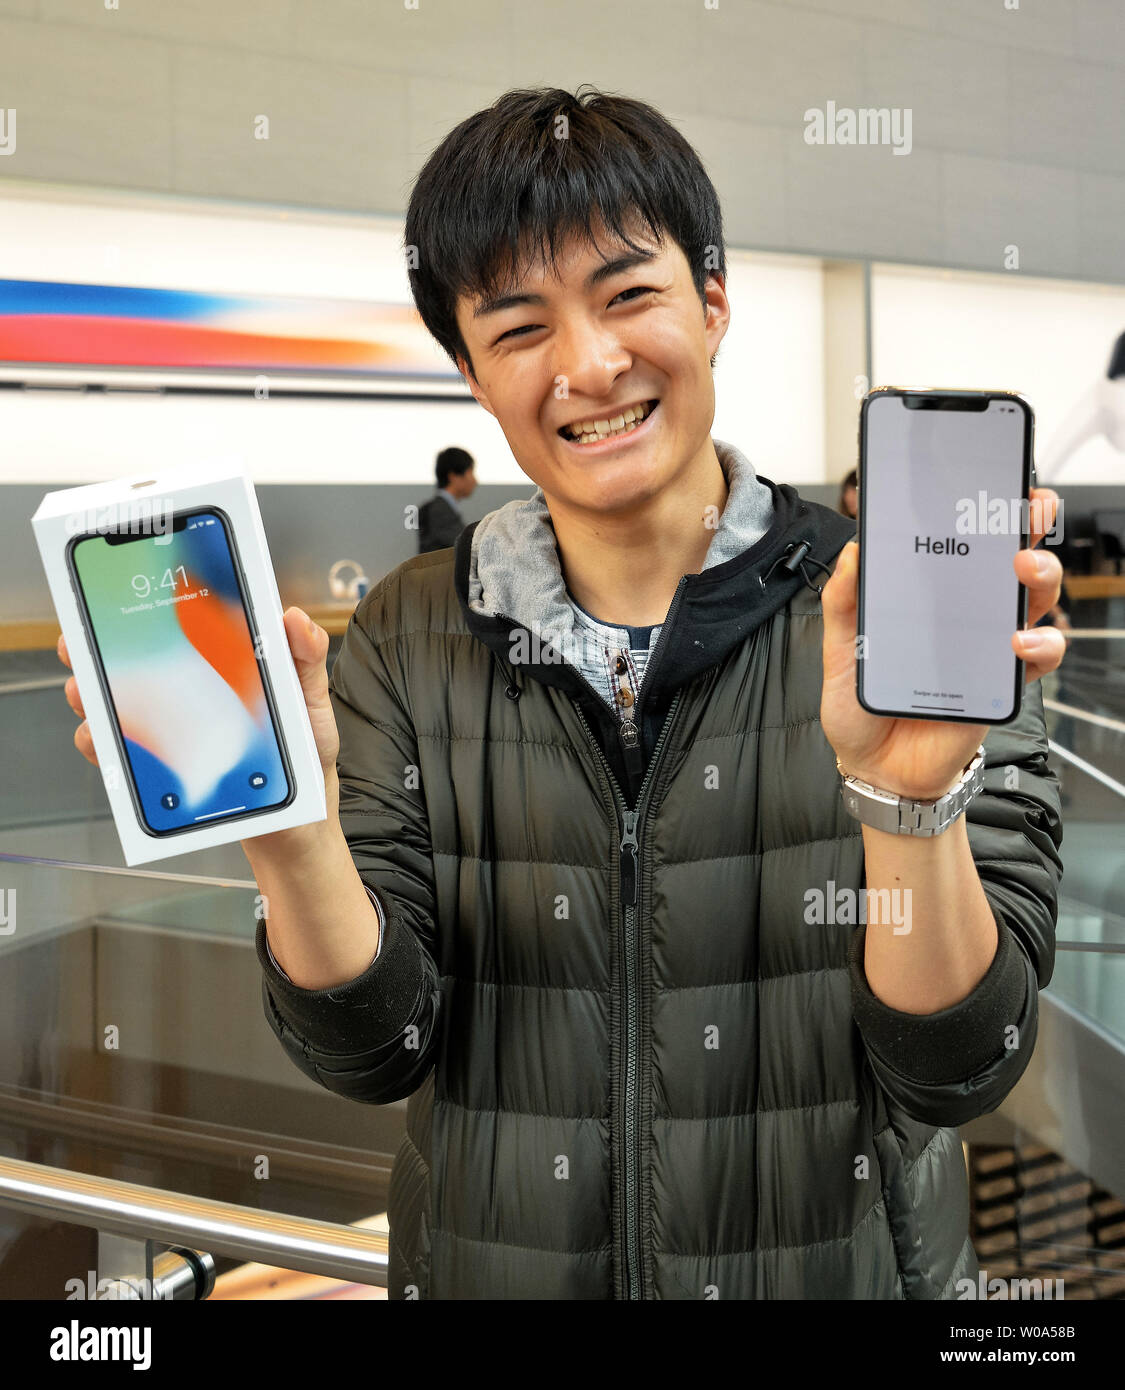 The first customer shows off his new Apple iPhone X at the Apple store  Omotesando in Tokyo, Japan on November 3, 2017. Photo by Keizo Mori/UPI  Stock Photo - Alamy